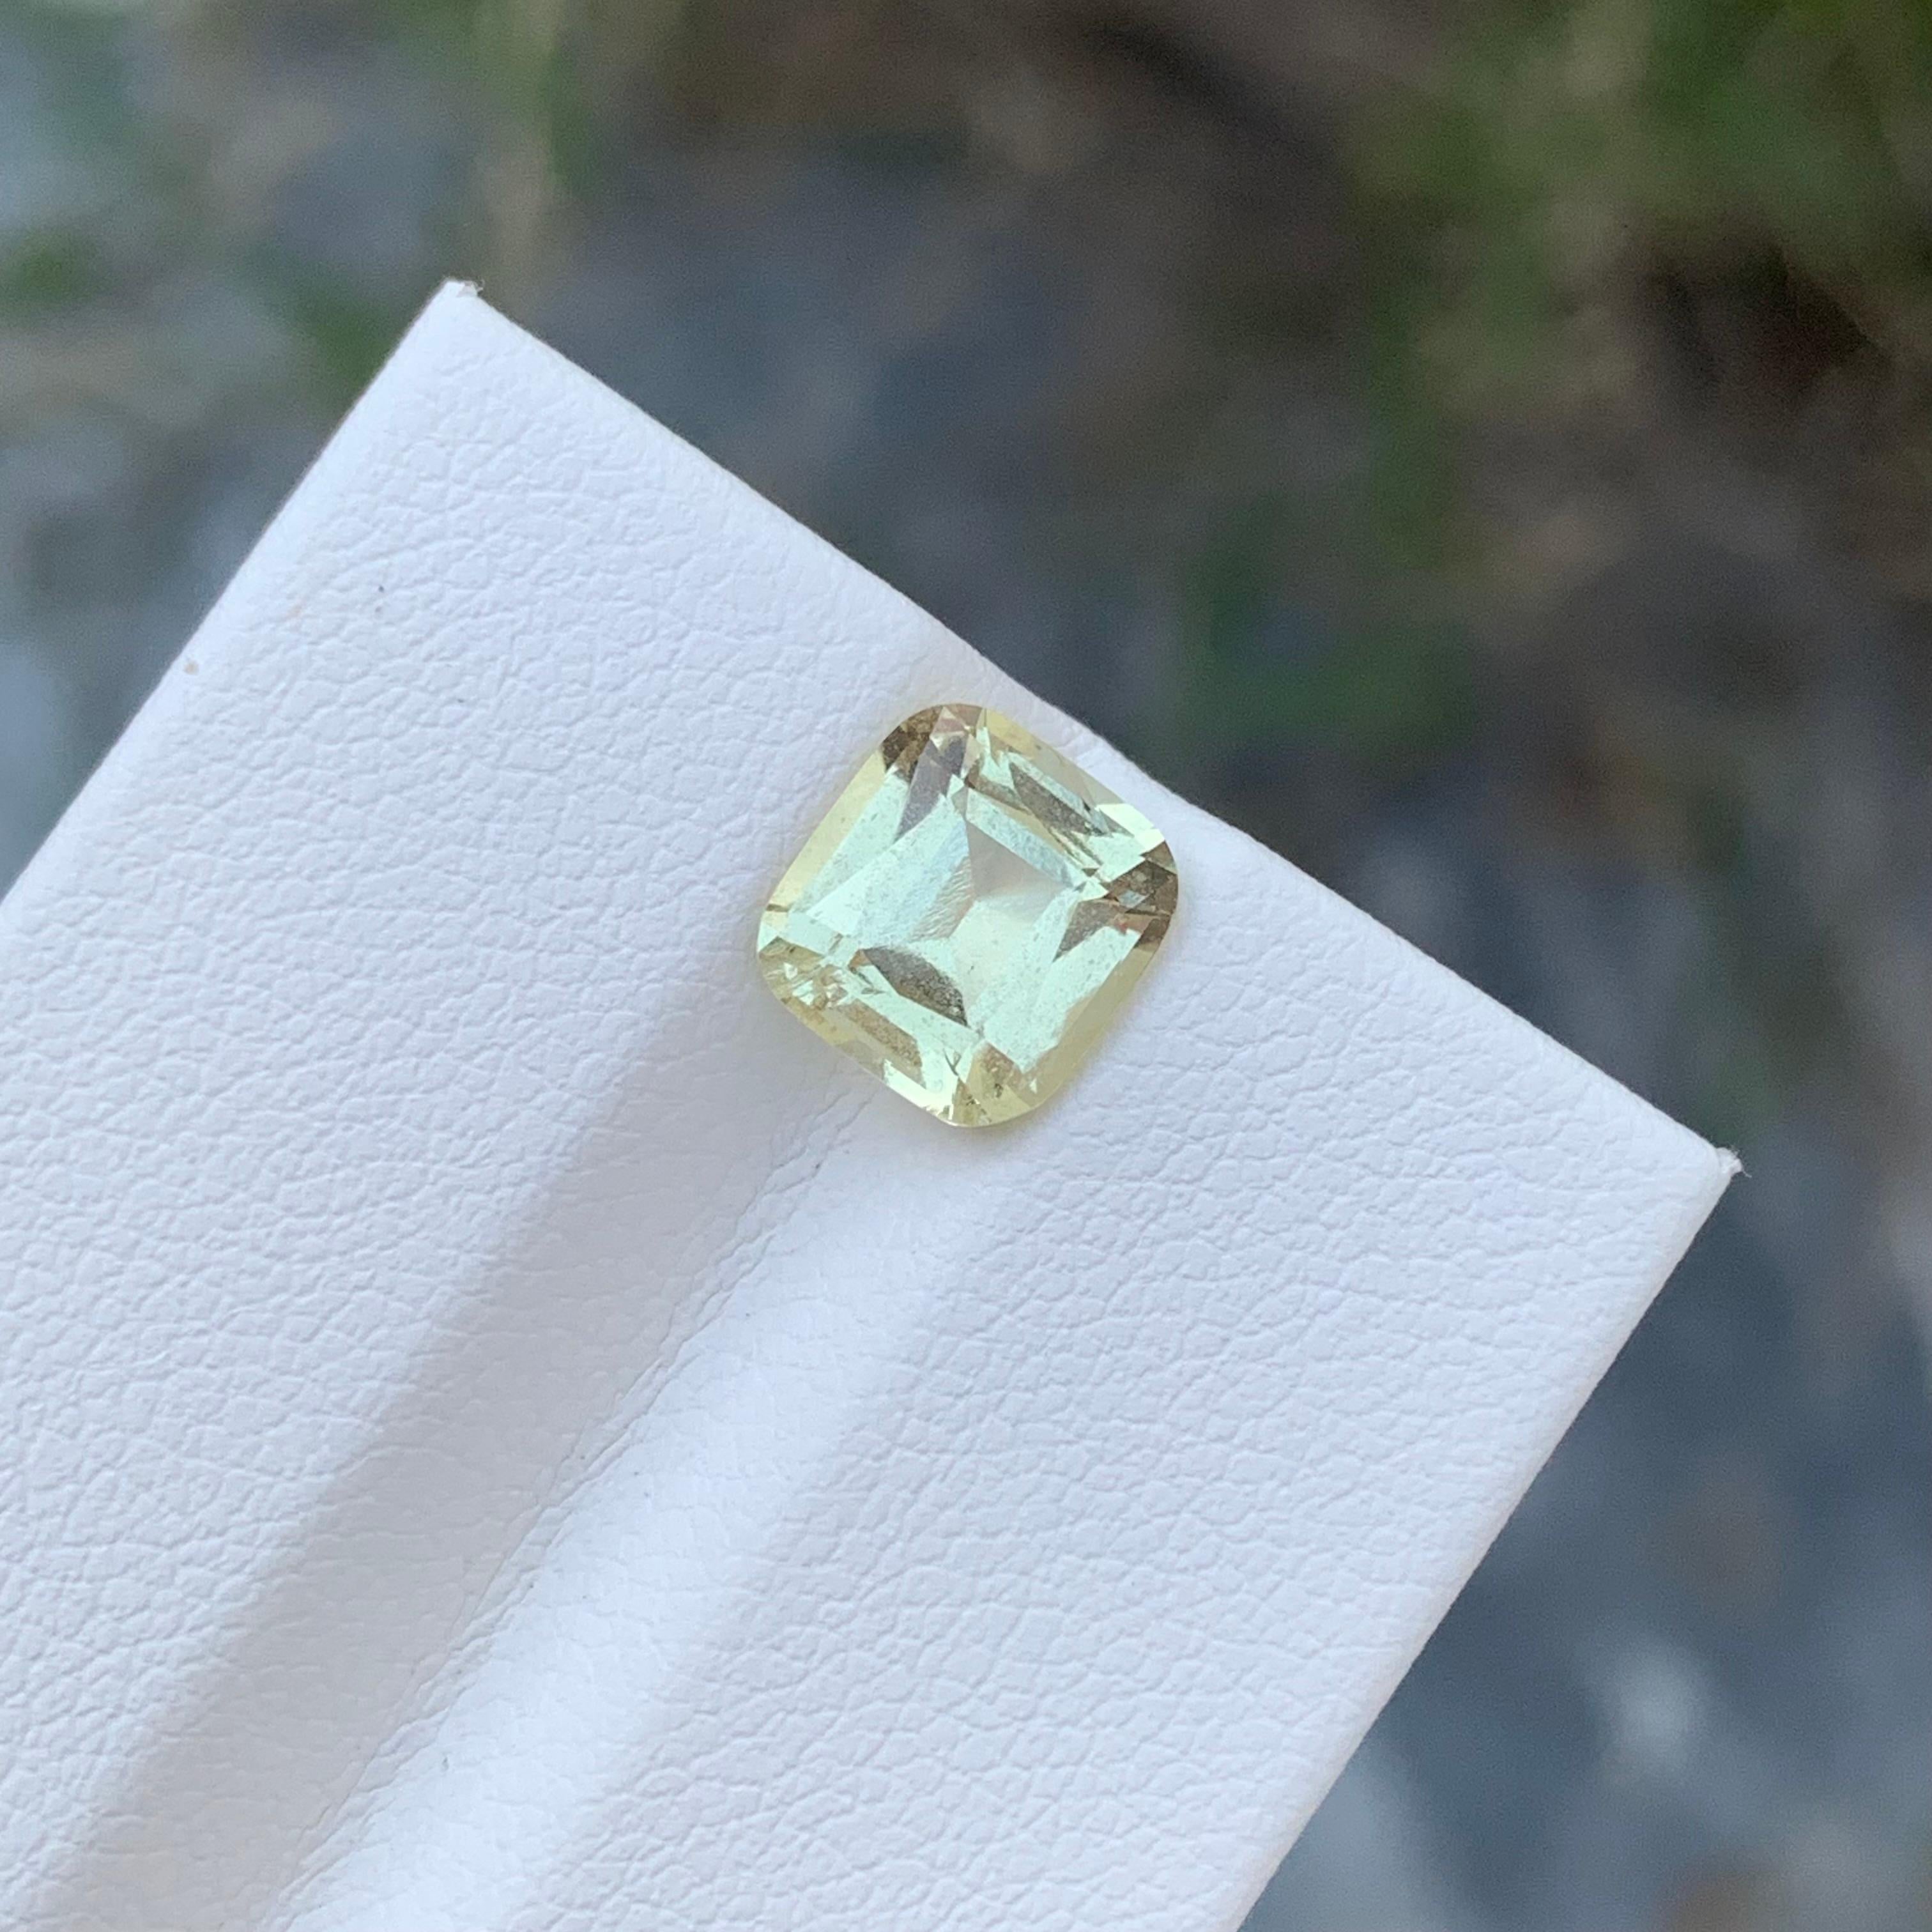 Loose Heliodor
Weight: 1.90 Carat
Dimension: 8 x 7.5 x 4.9 Mm
Origin: Brazil
Shape: Square
Cut : Cushion 
Certificate: On Demand

Heliodor, a captivating member of the beryl mineral family, is renowned for its radiant golden to yellow hues. The name